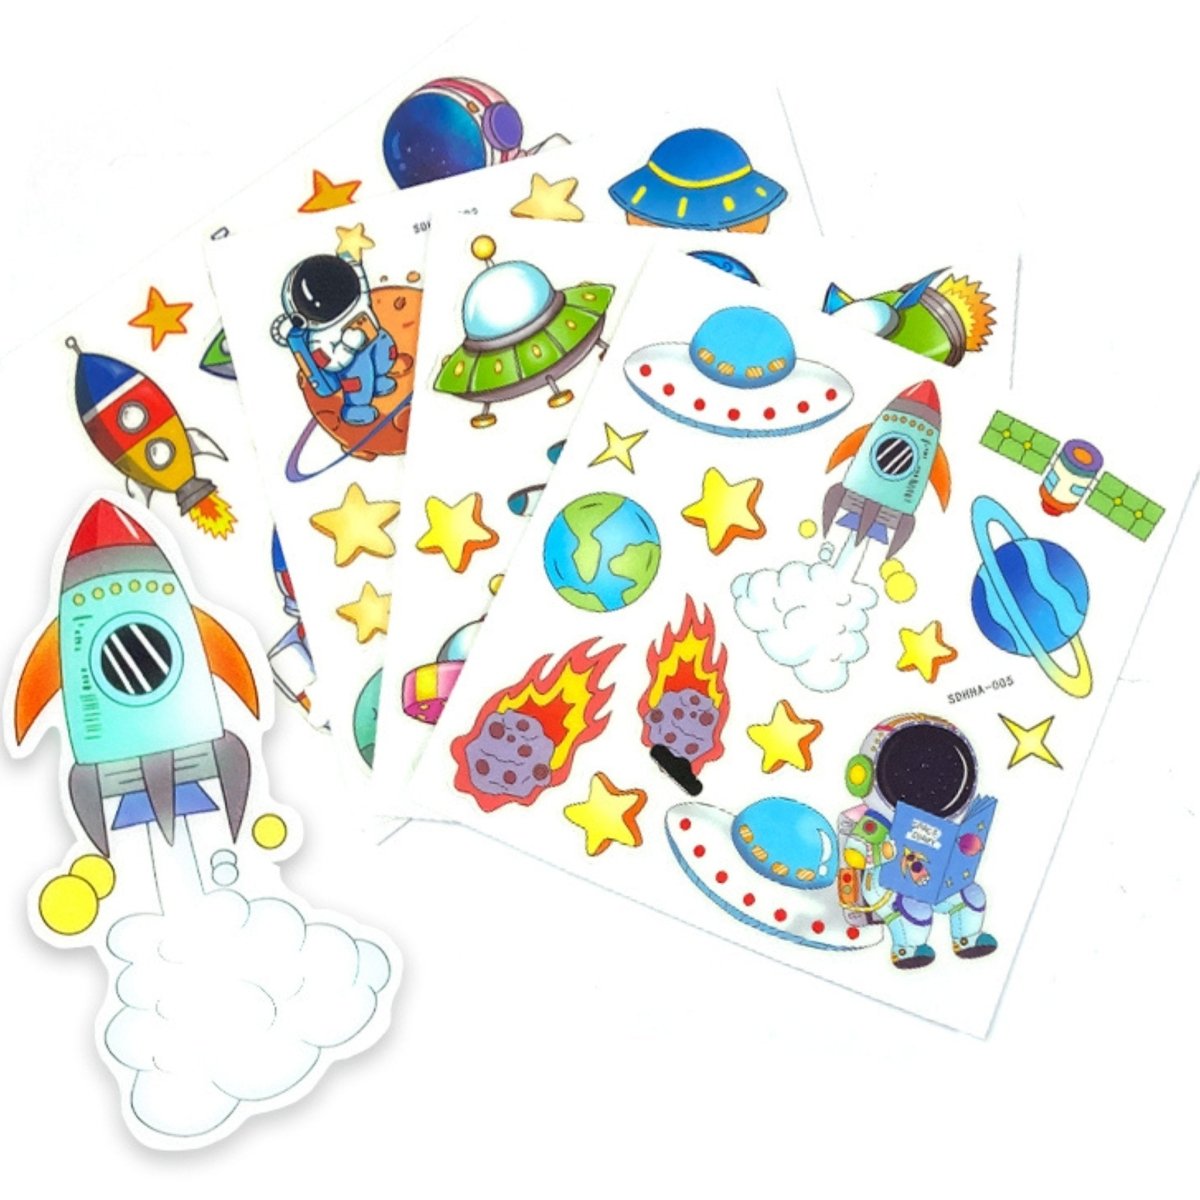 Space Themed Glow In The Dark Stickers - Kids Party Craft